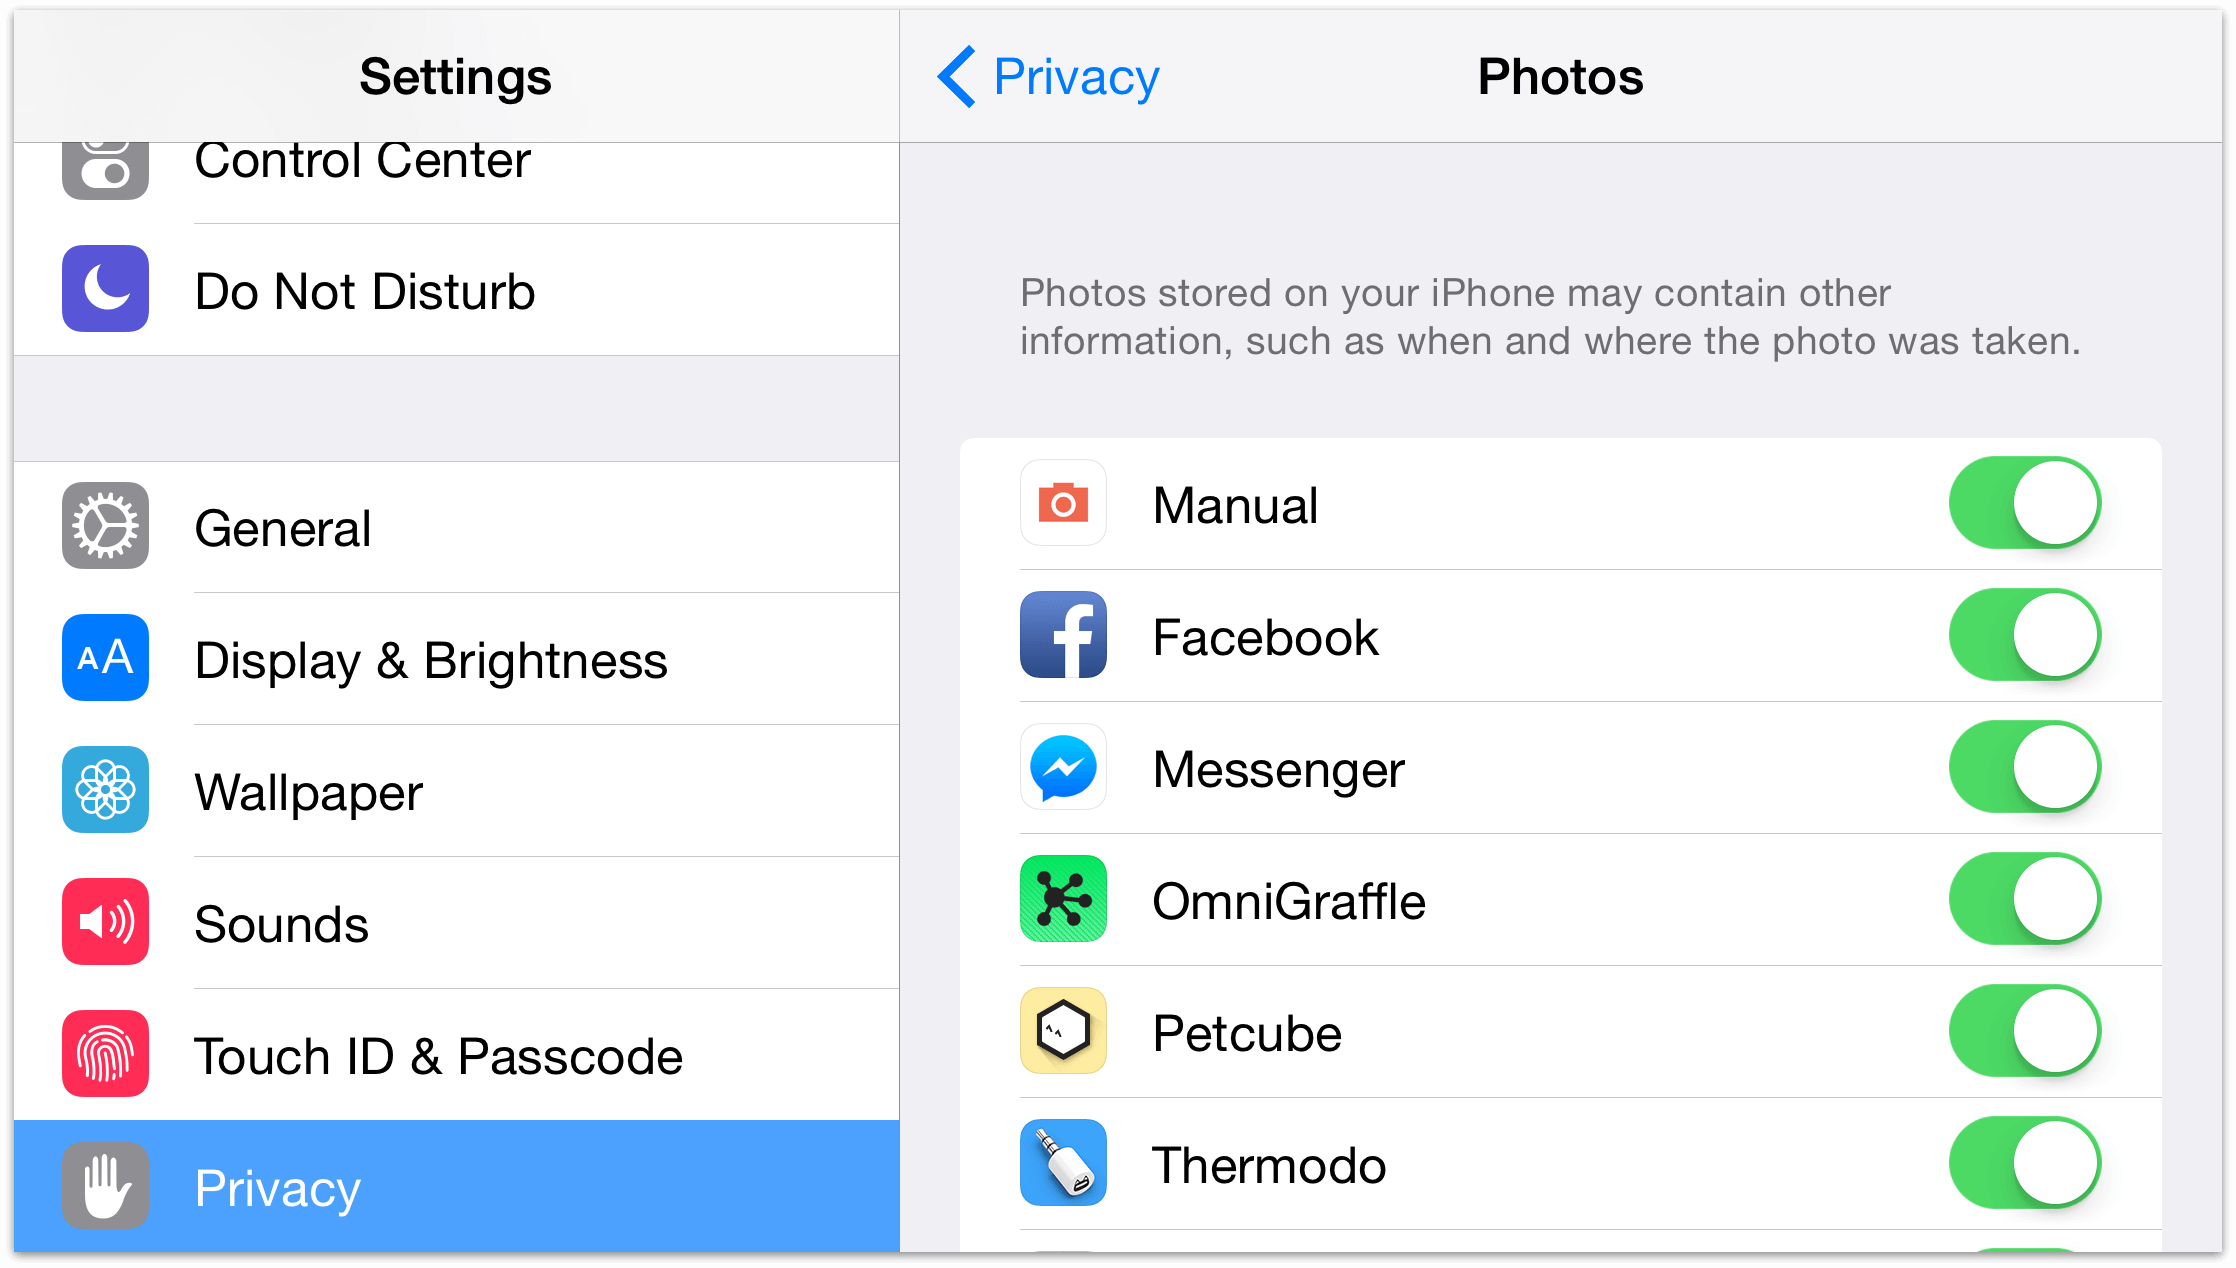 The Privacy tab in the Settings app